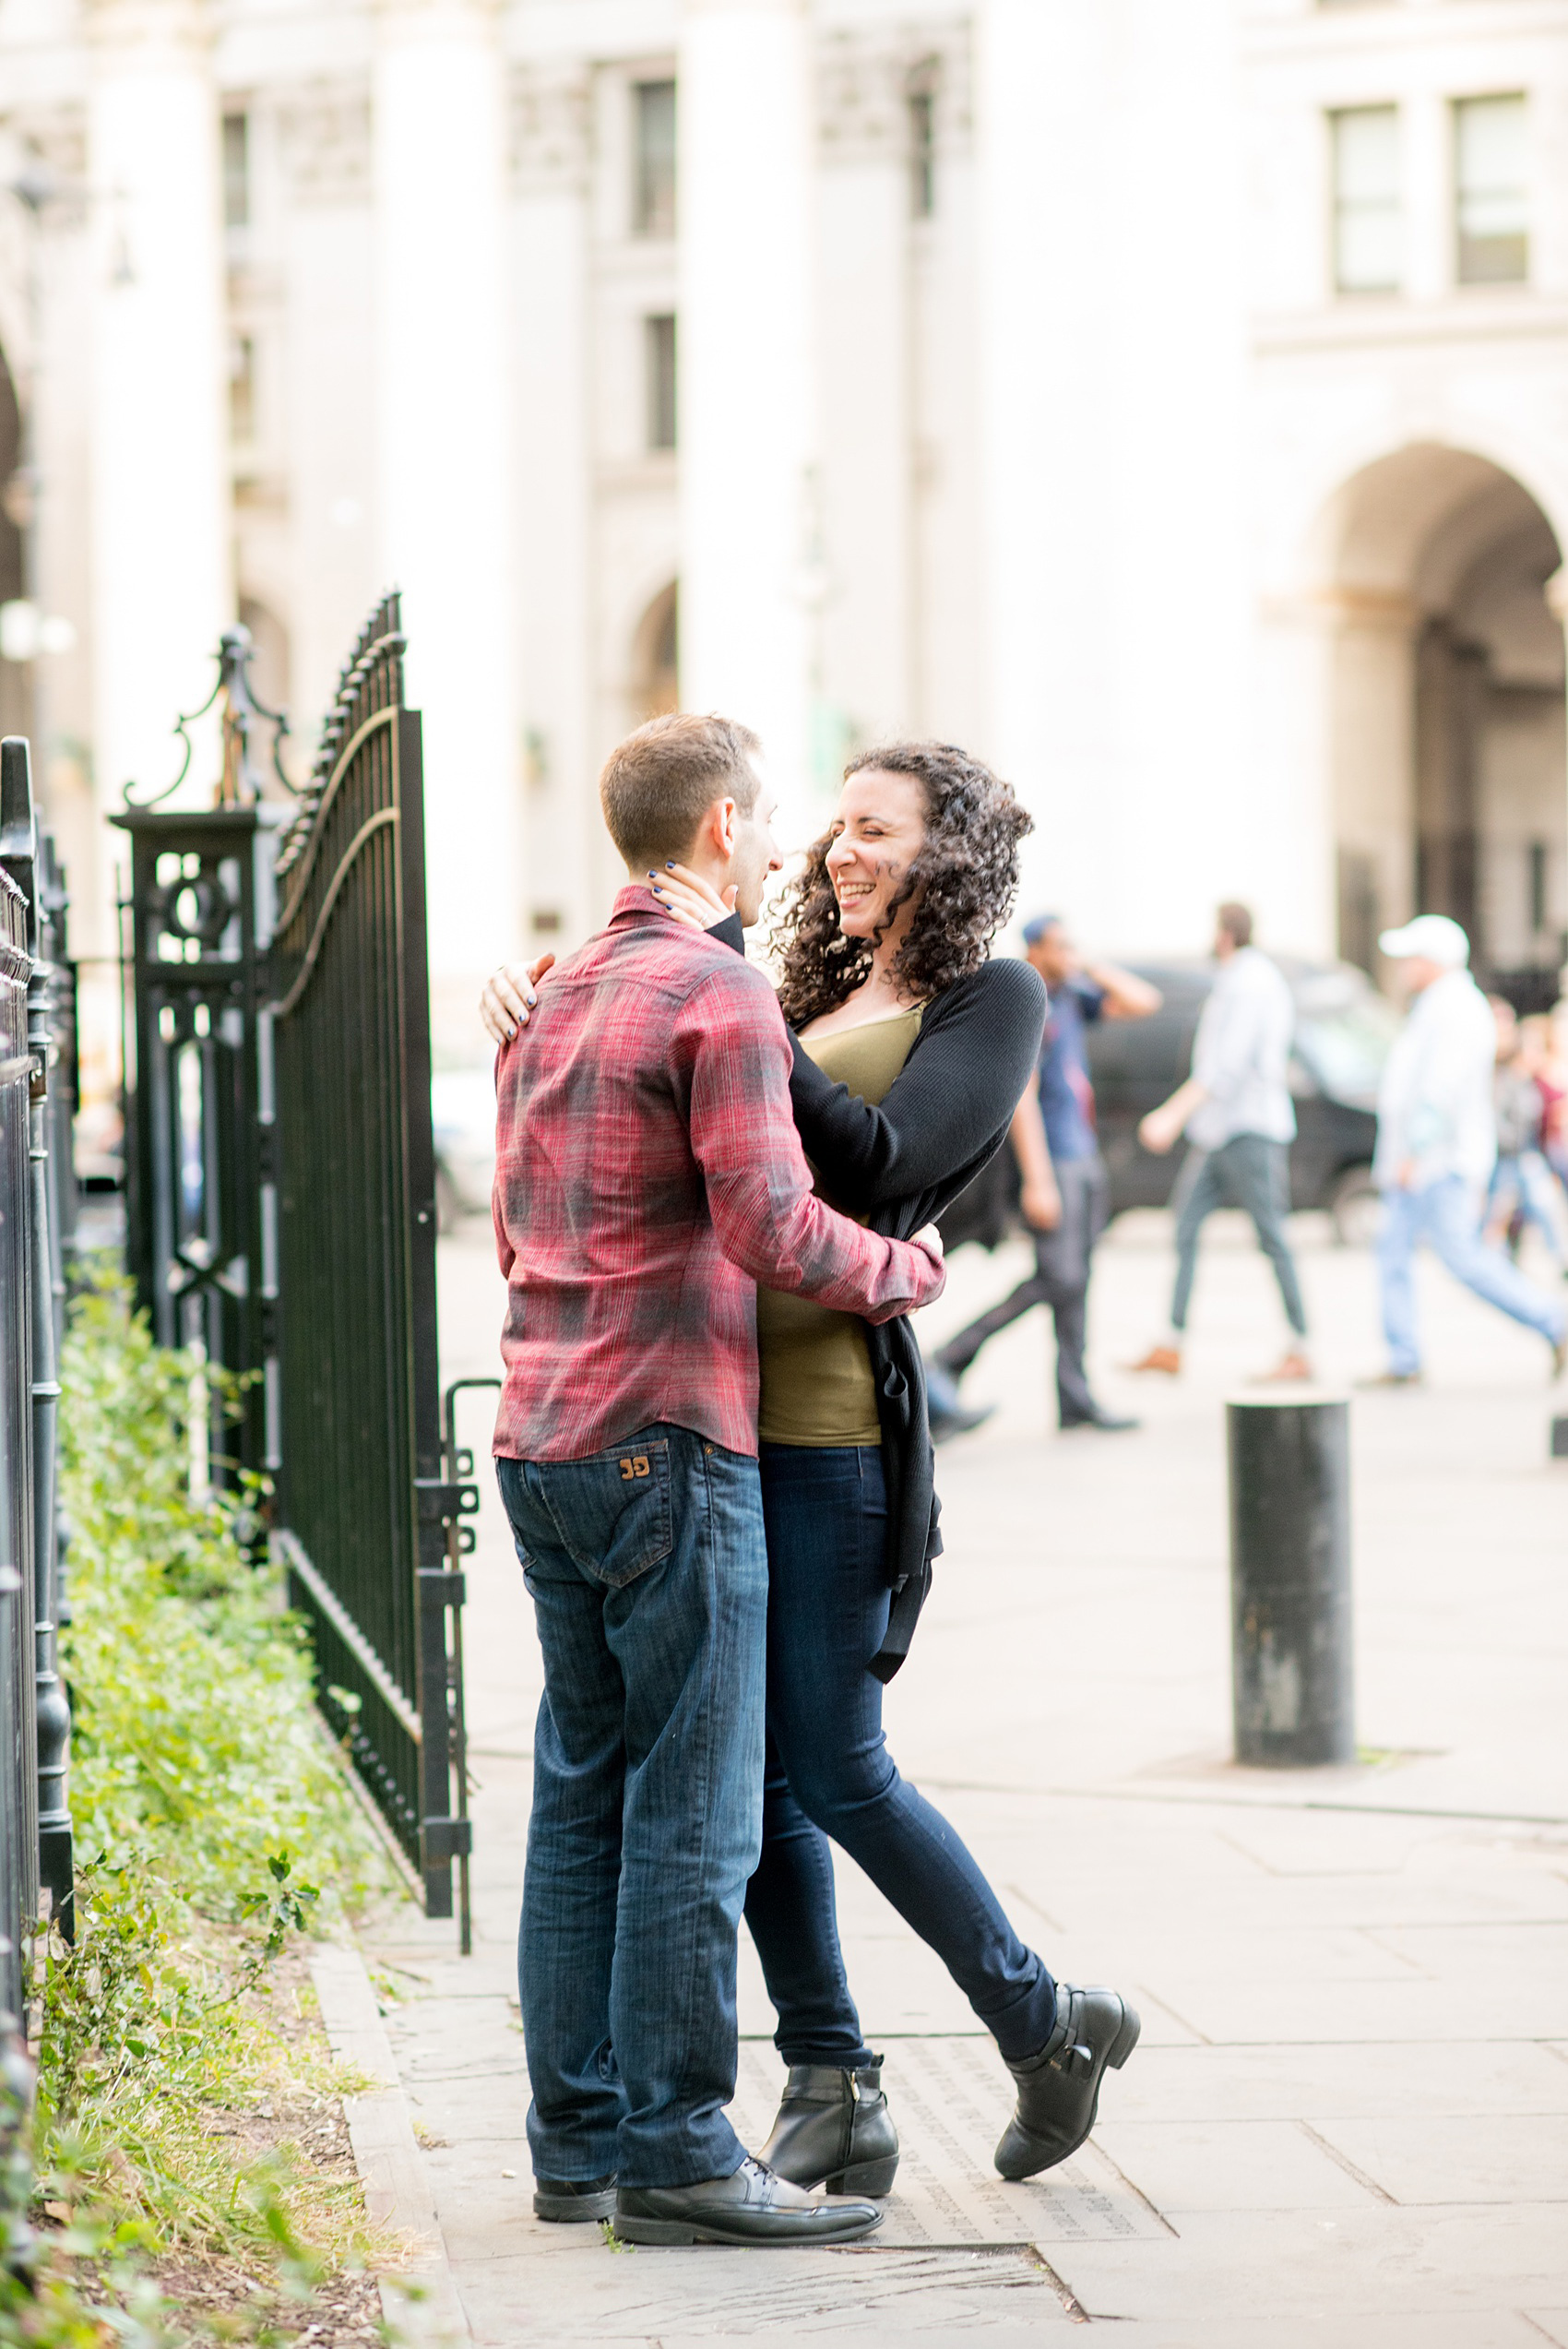 Mikkel Paige Photography engagement photos in lower manhattan near City Hall and the Brooklyn Bridge.